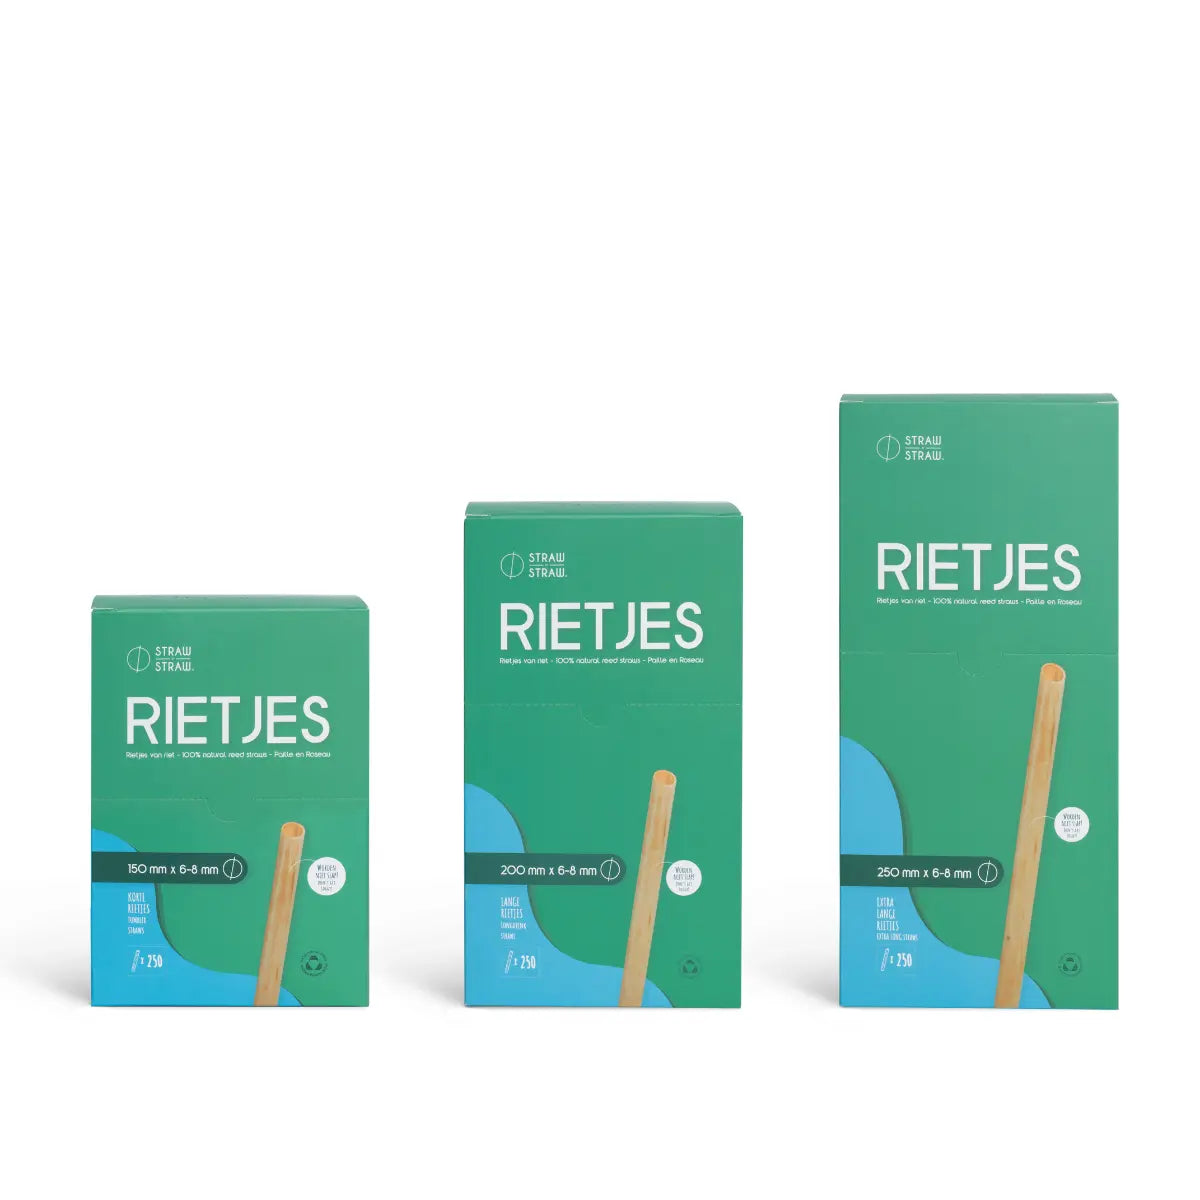 Eco-friendly straws made of reed